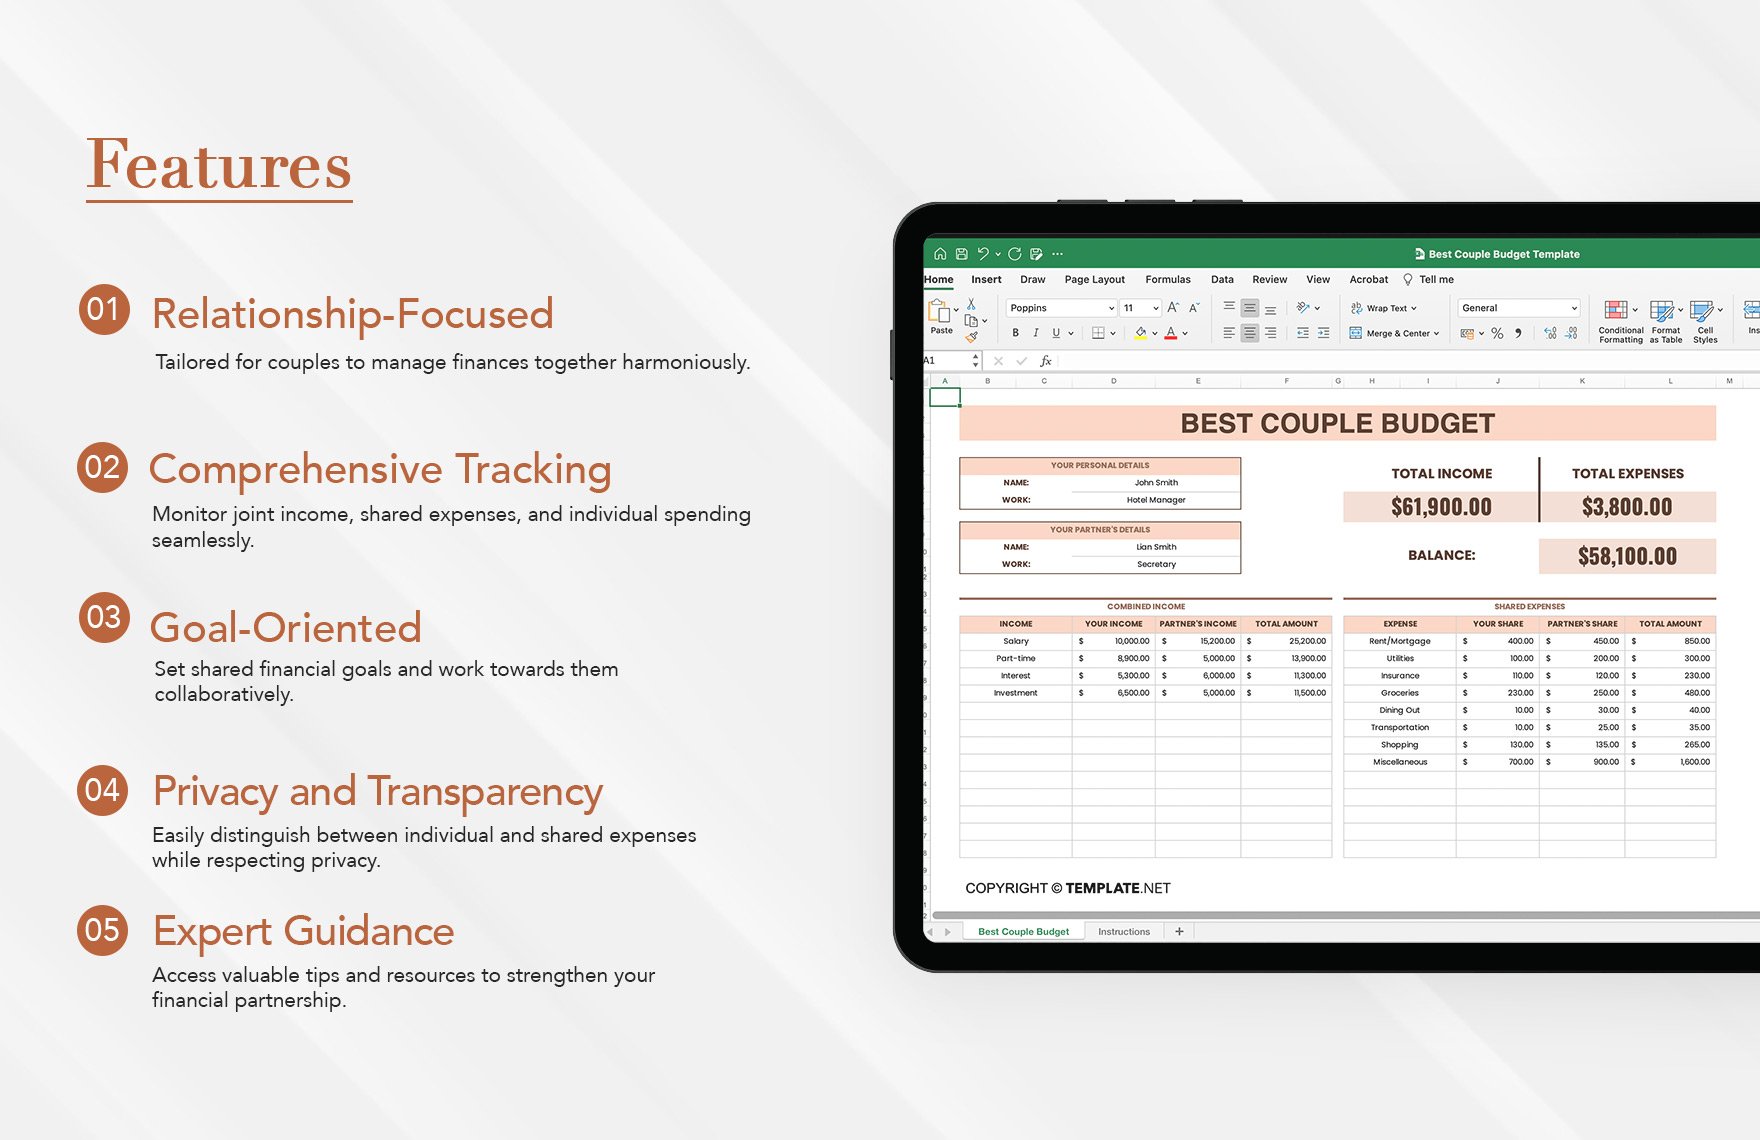 Free Best Couple Budget Template - Download in Excel, Google Sheets ...